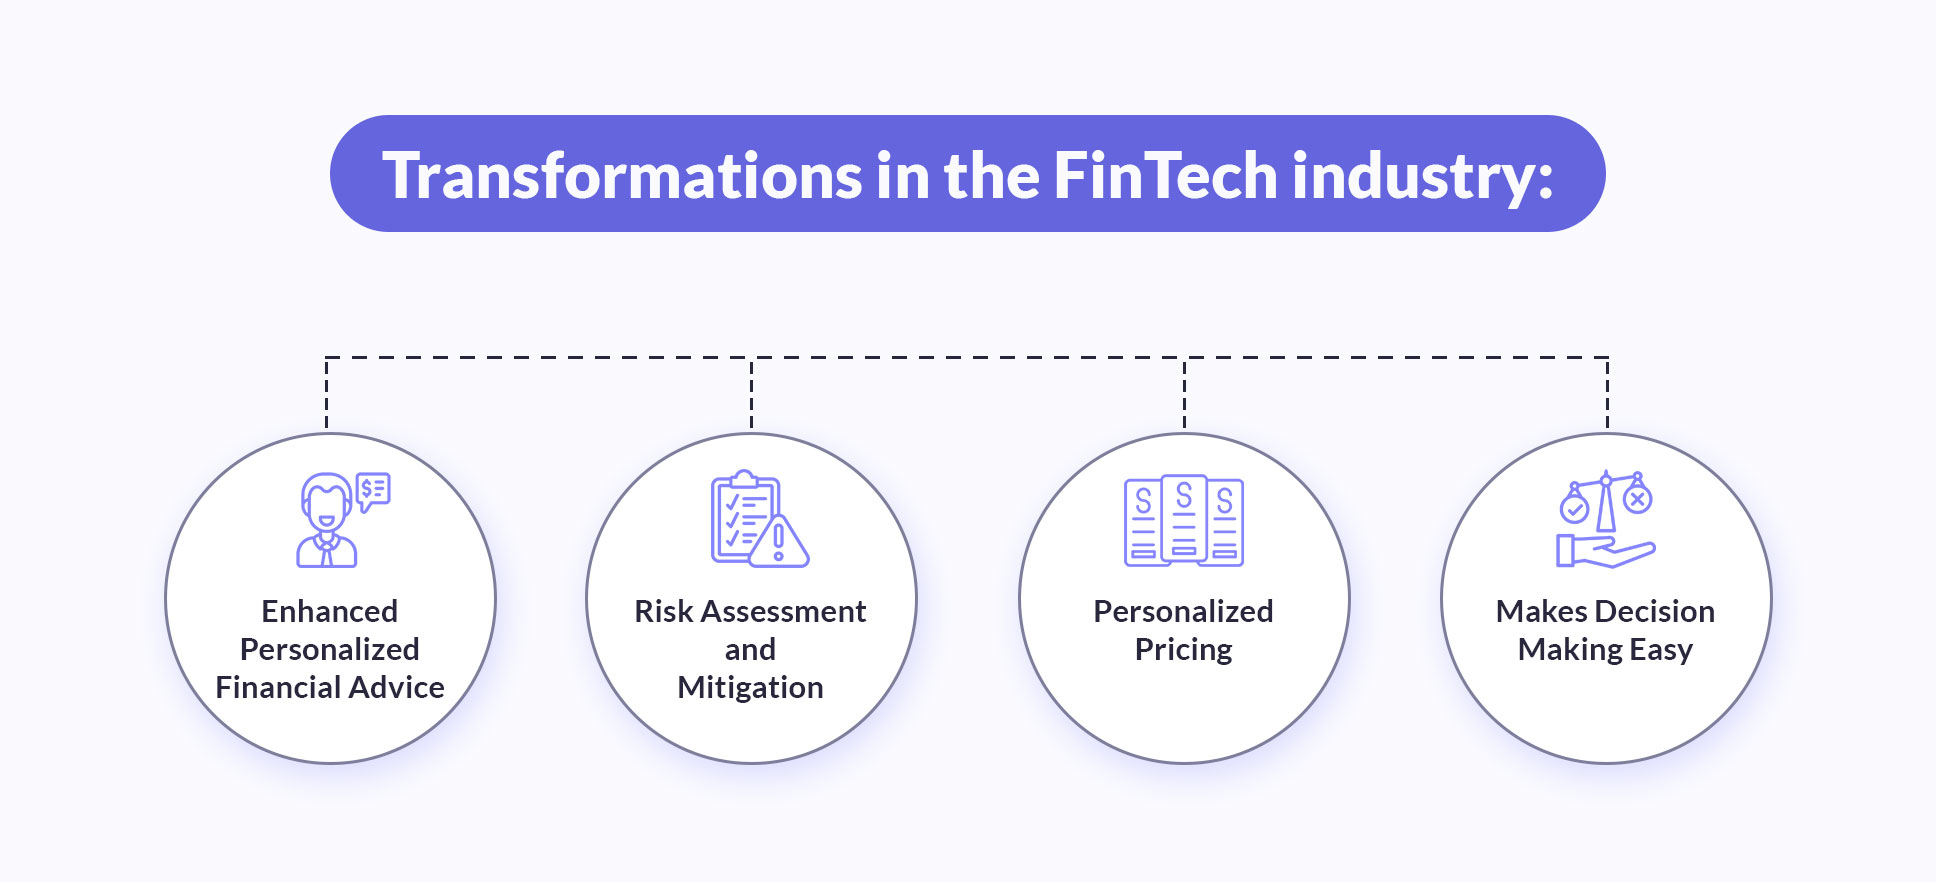 Transformations in the FinTech industry